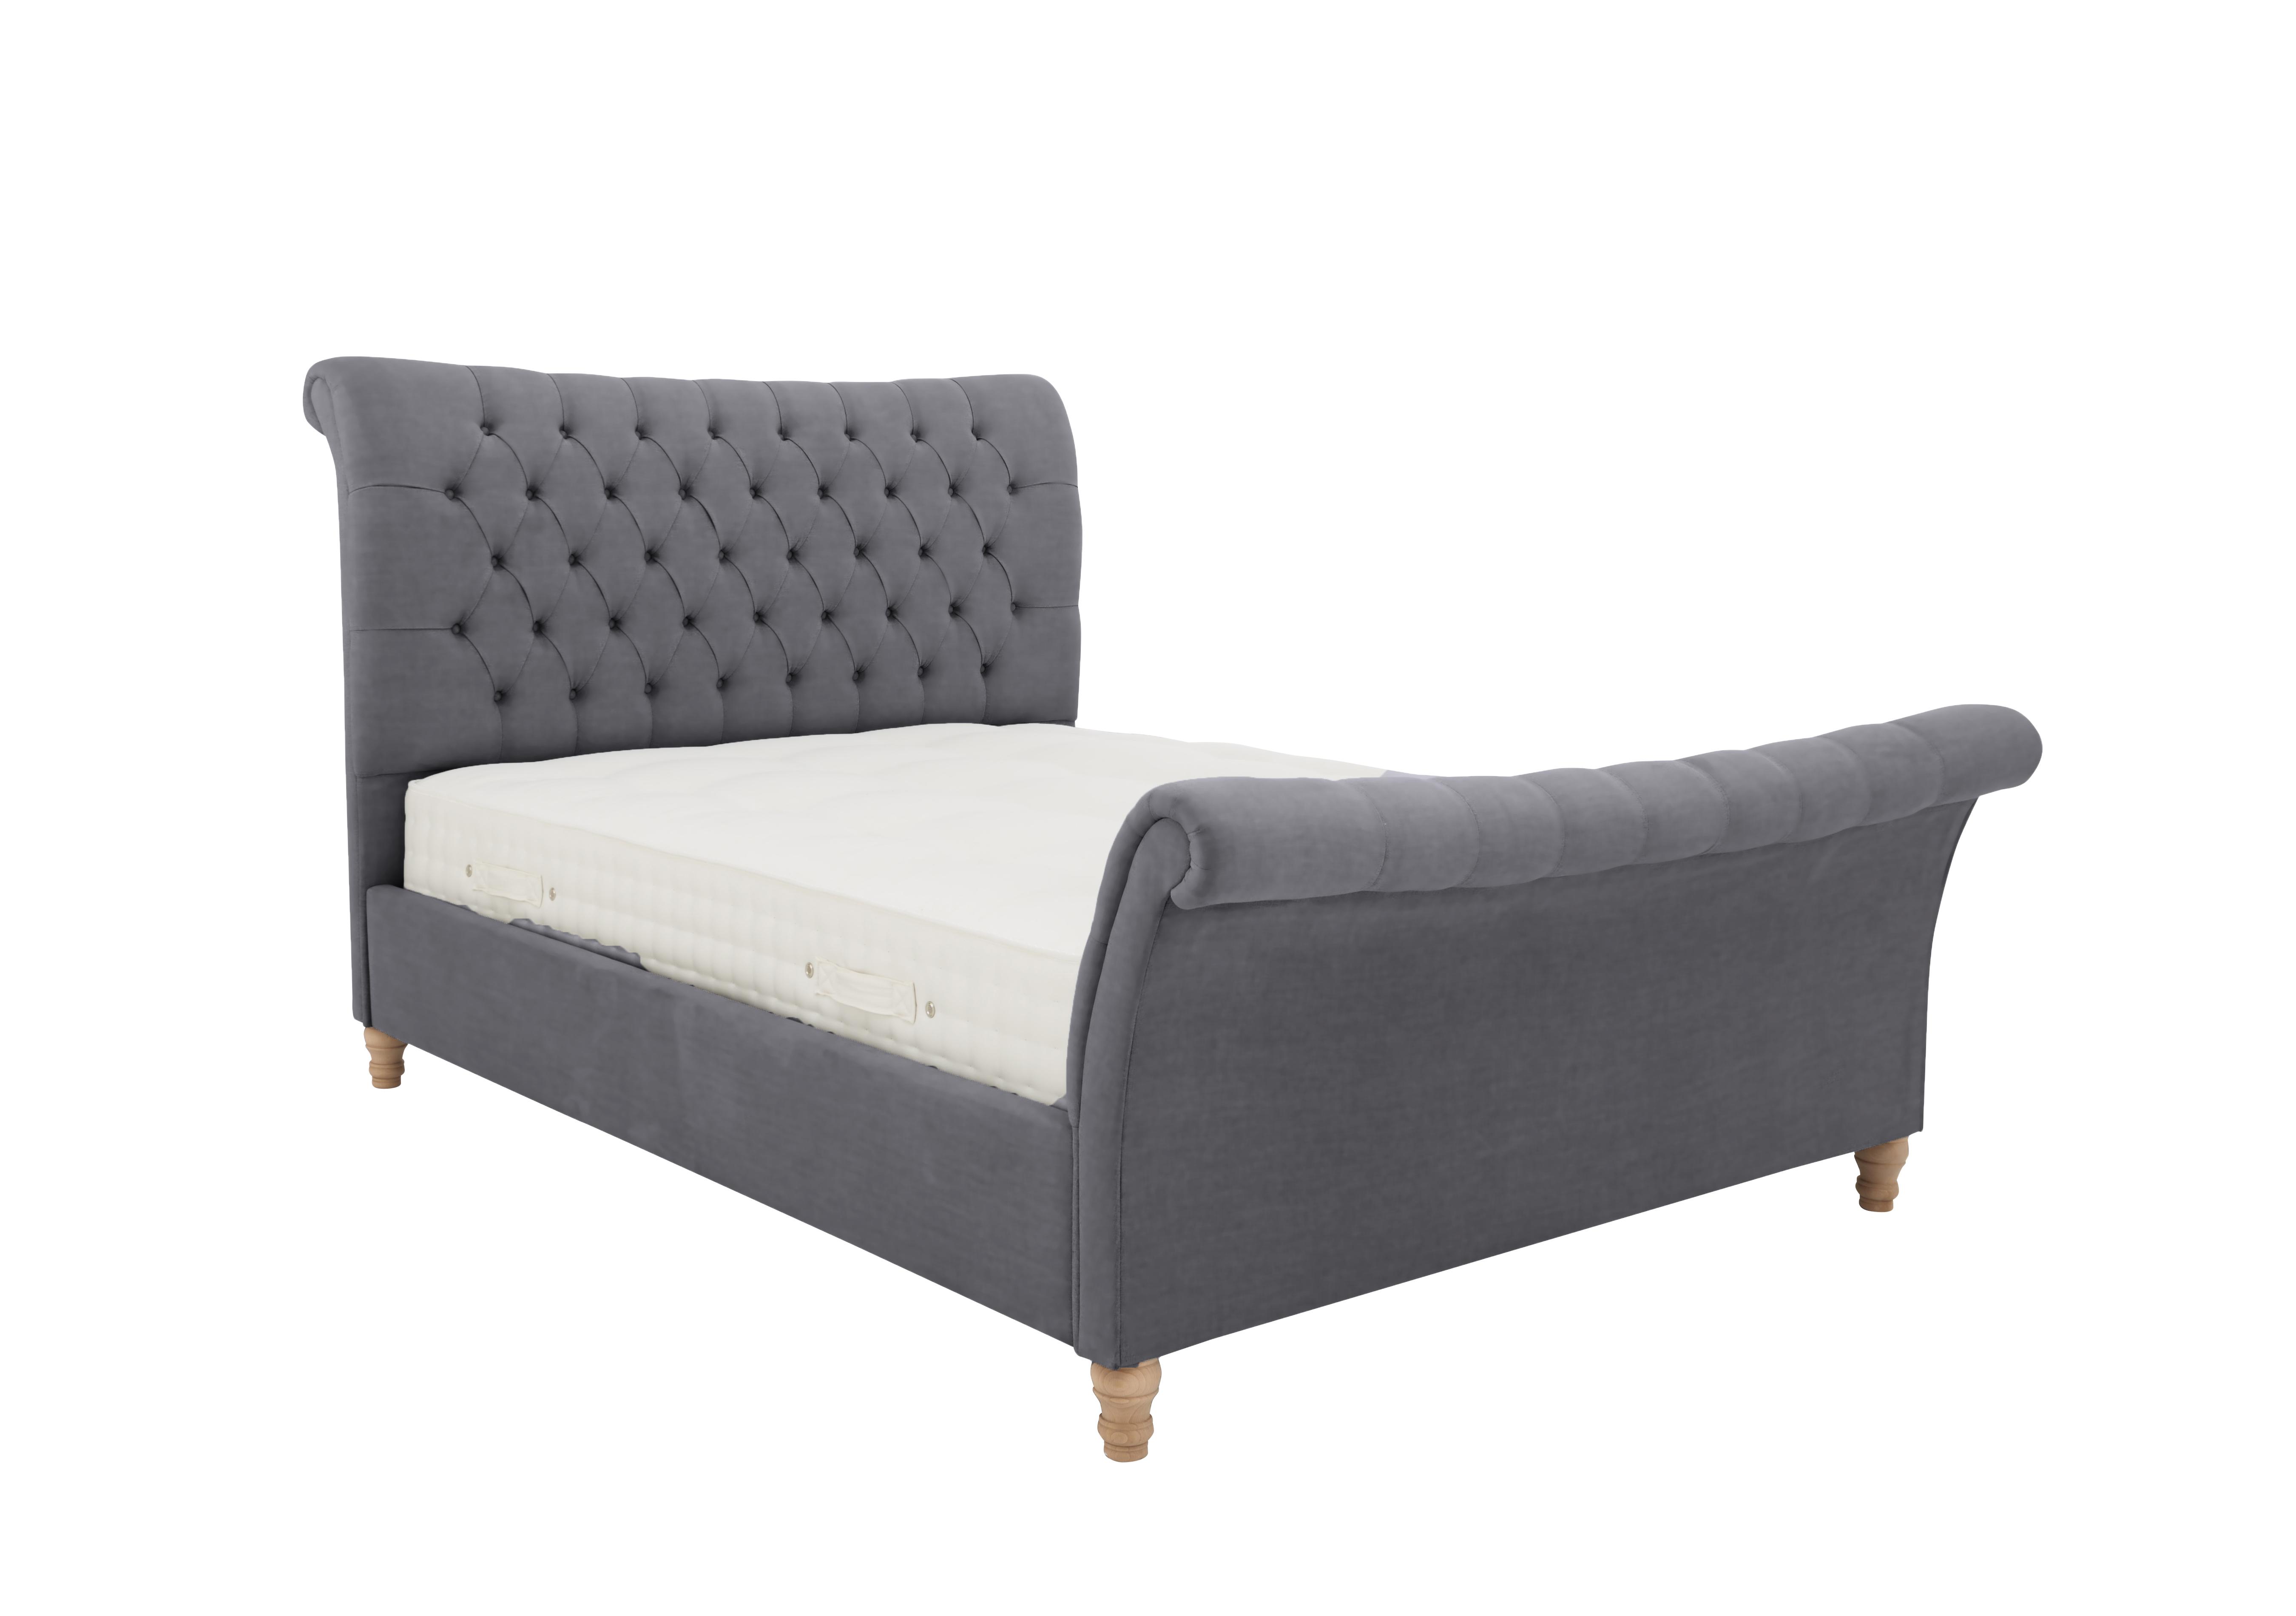 Evie Bed Frame in Savannah Armour on Furniture Village